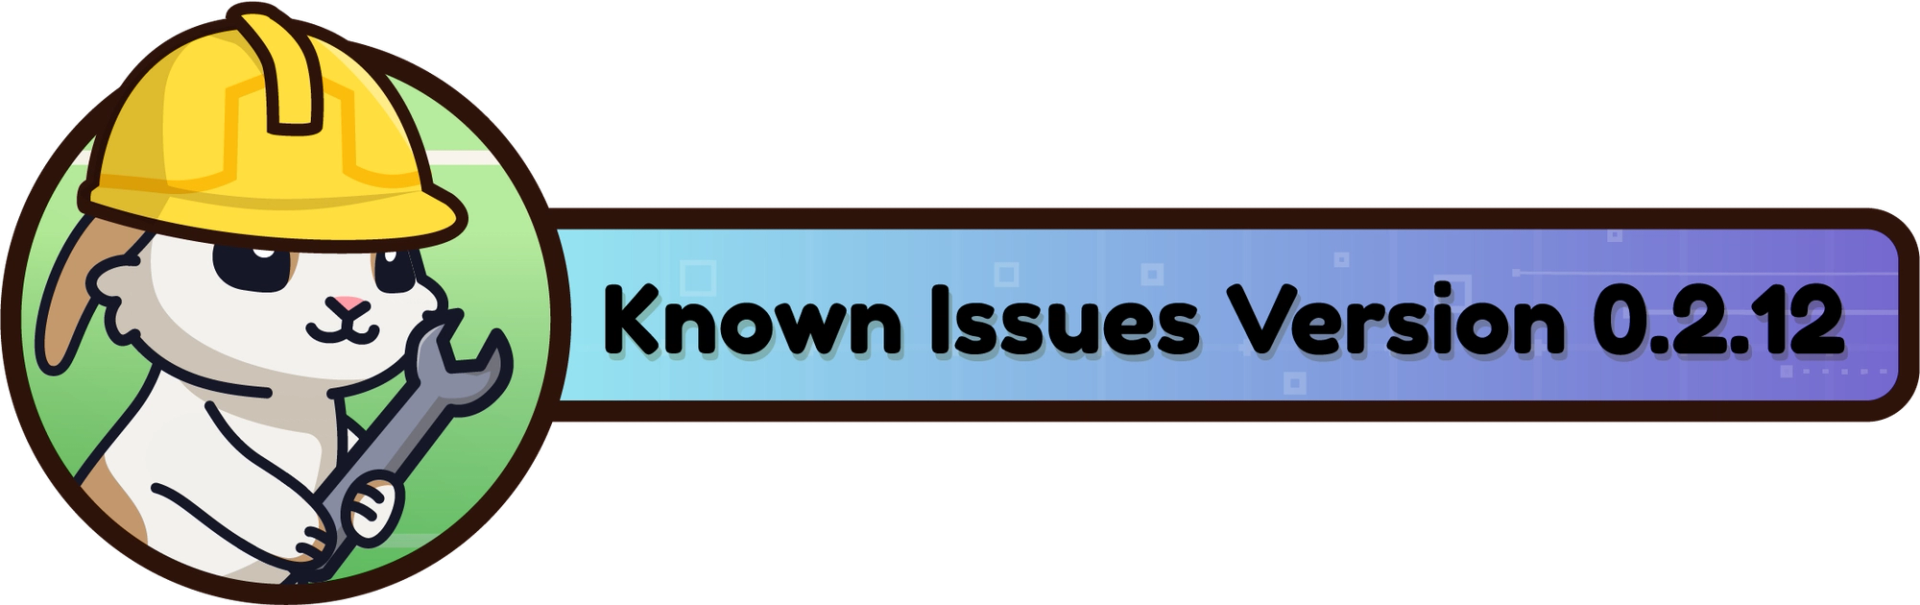 Known Issues Version 0.2.12